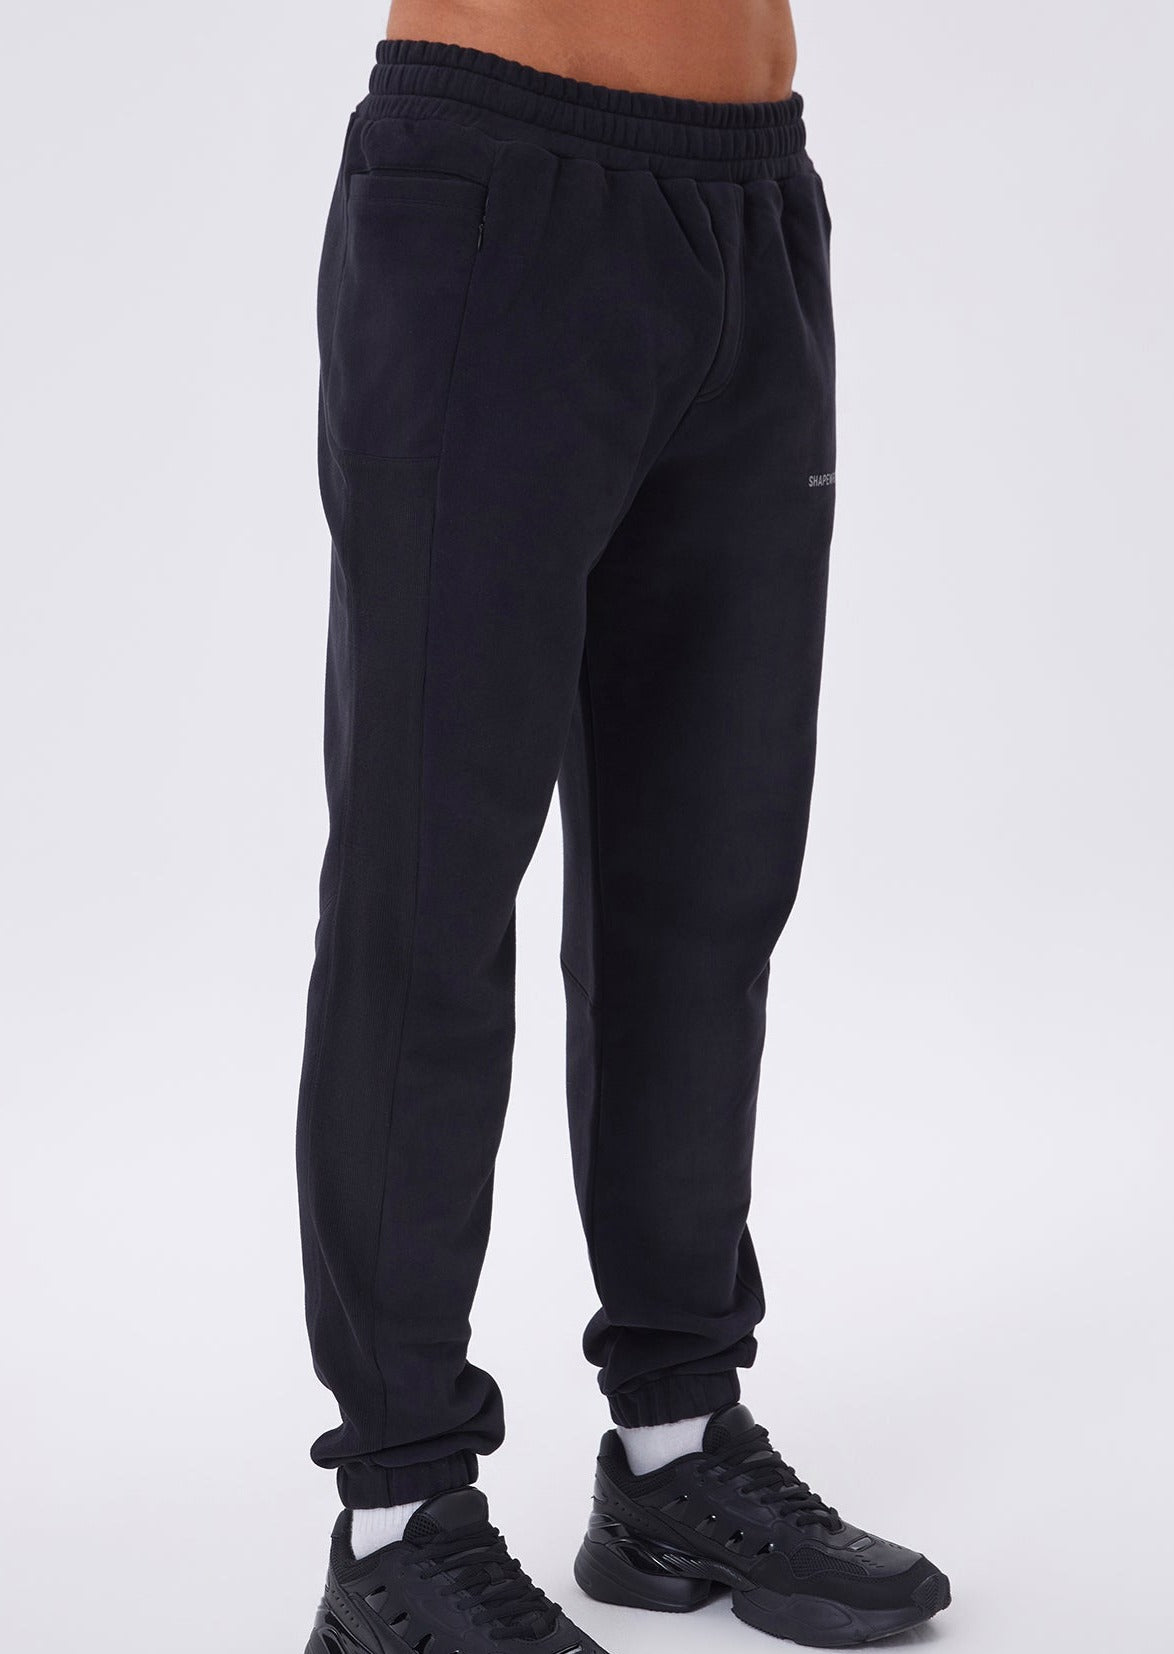 RELAXED FIT Sweatpant PRIMARY JOGGER - BLACK